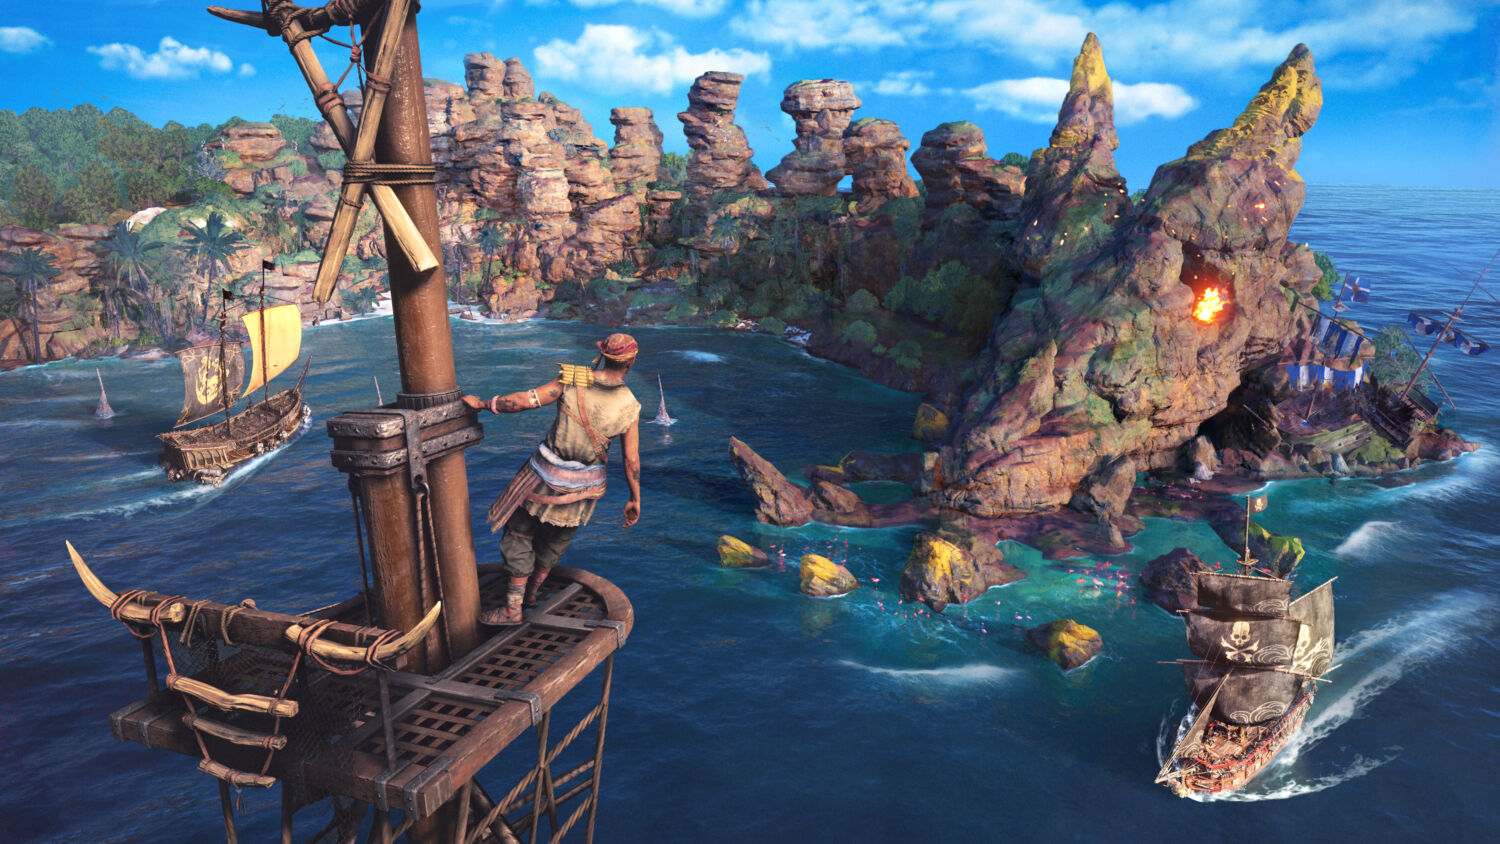 Skull and Bones: We try out the pirate adventure for ourselves